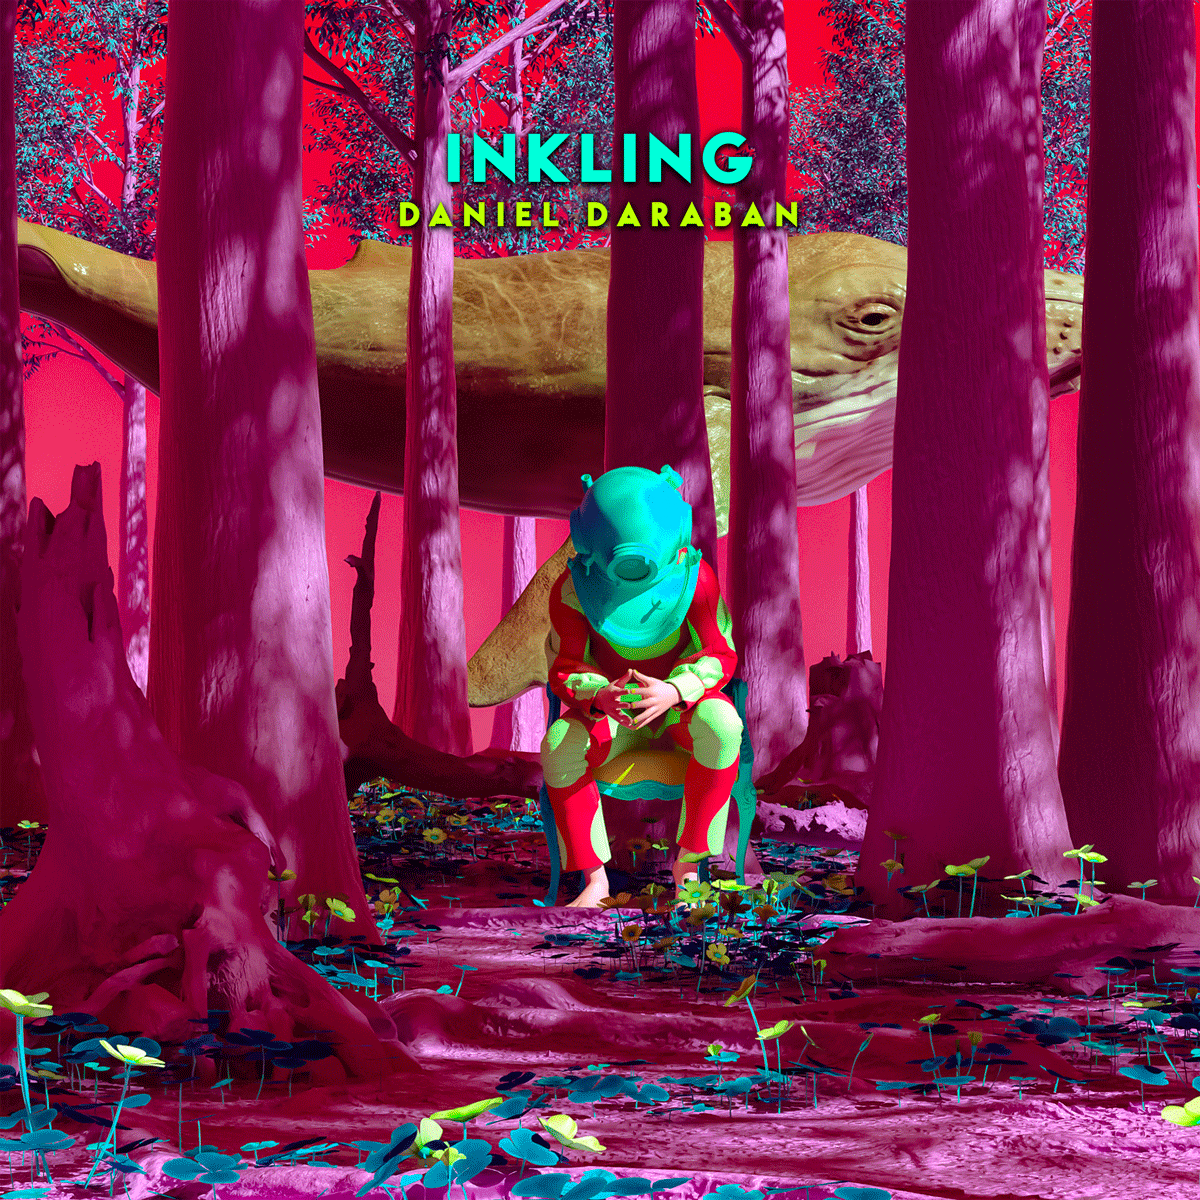 “Inkling” is the new single by Daniel Daraban on Dark & White Rabbits Records